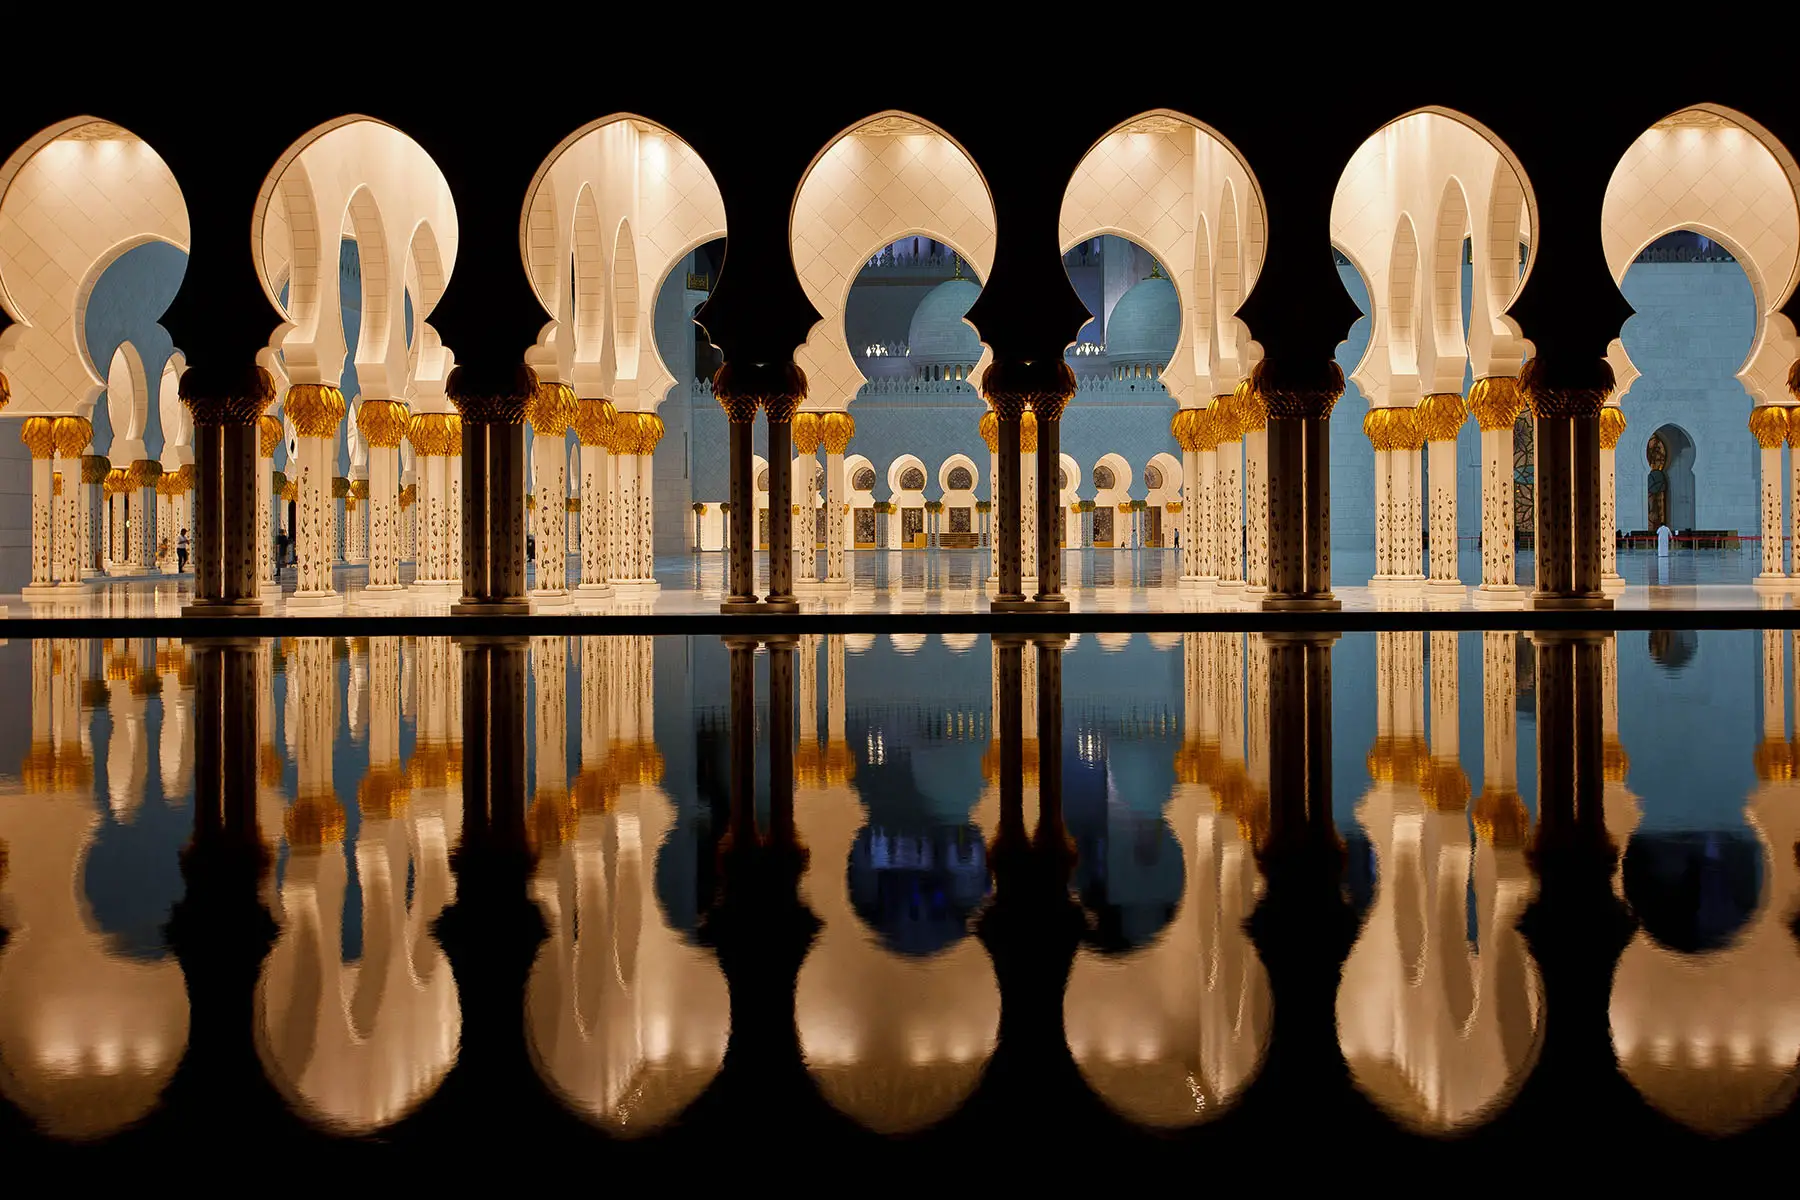 Sheikh Zayed Grand Mosque in Abu Dhabi is the largest mosque in the United Arab Emirates and the eighth largest mosque in the world.